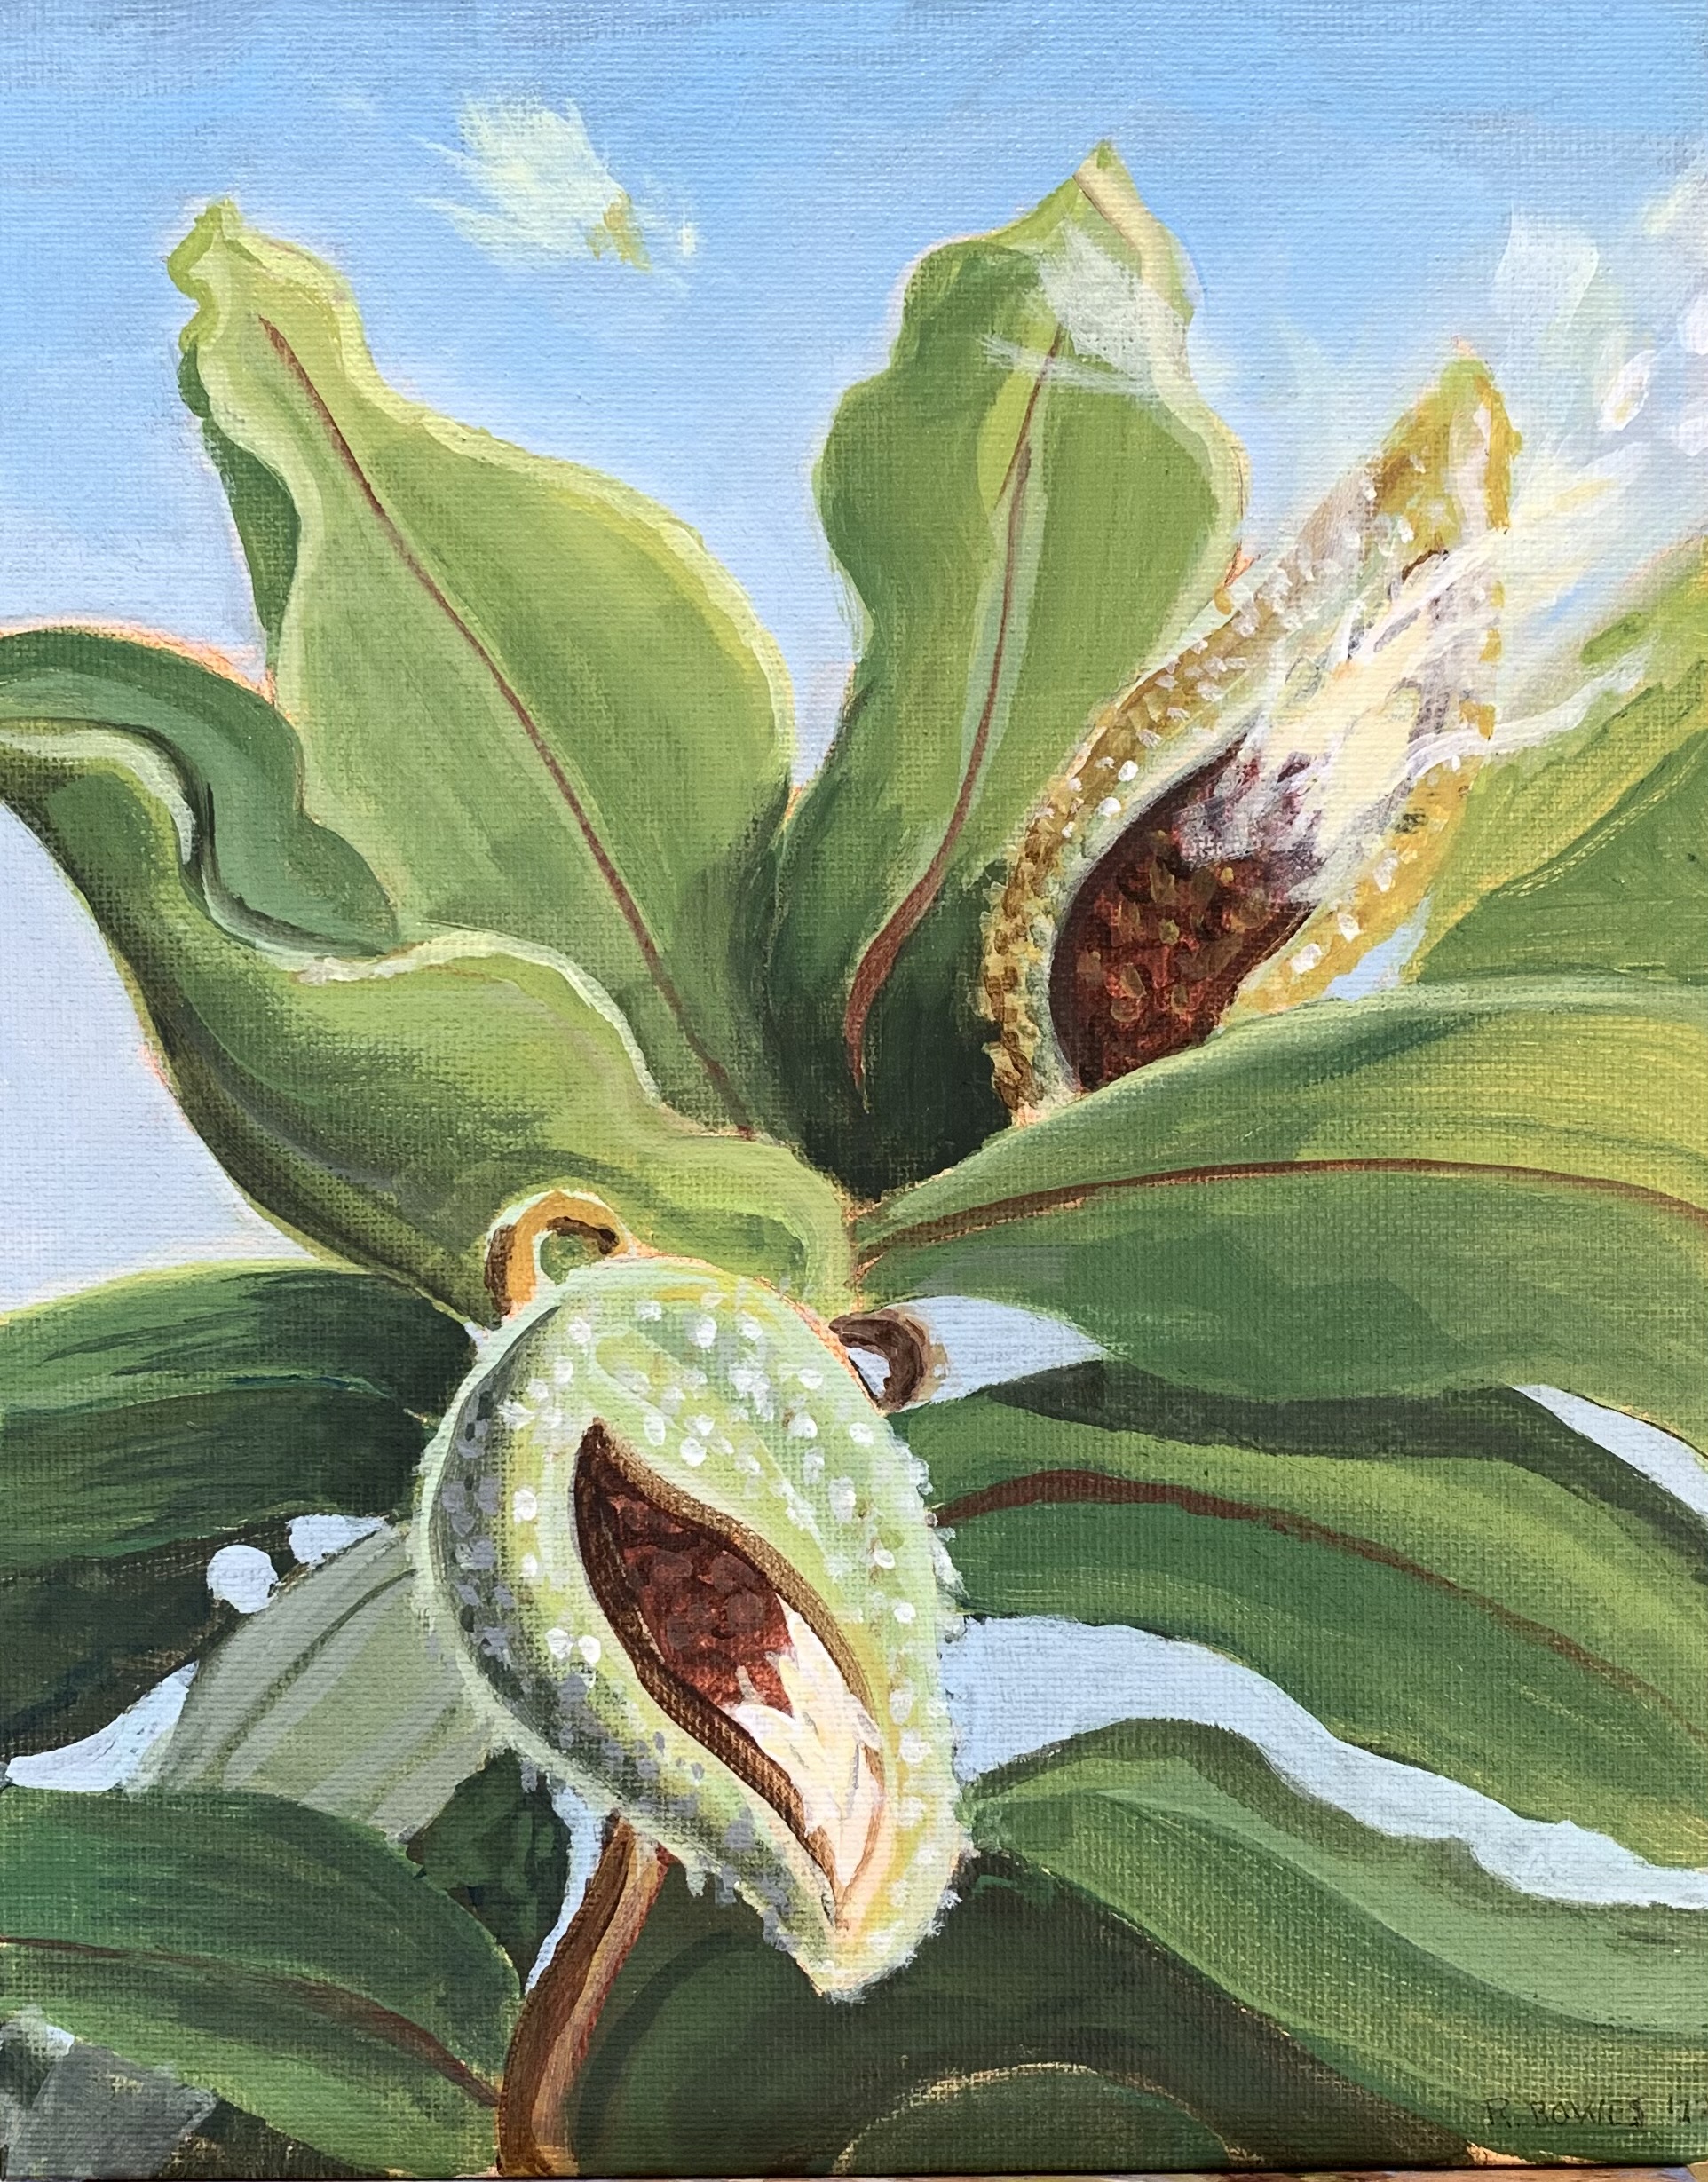 Common Milkweed, 8X10, acrylic on board, Rebecca Bowes, $50. The artist has designated 100% of this sale to go to the library fund.